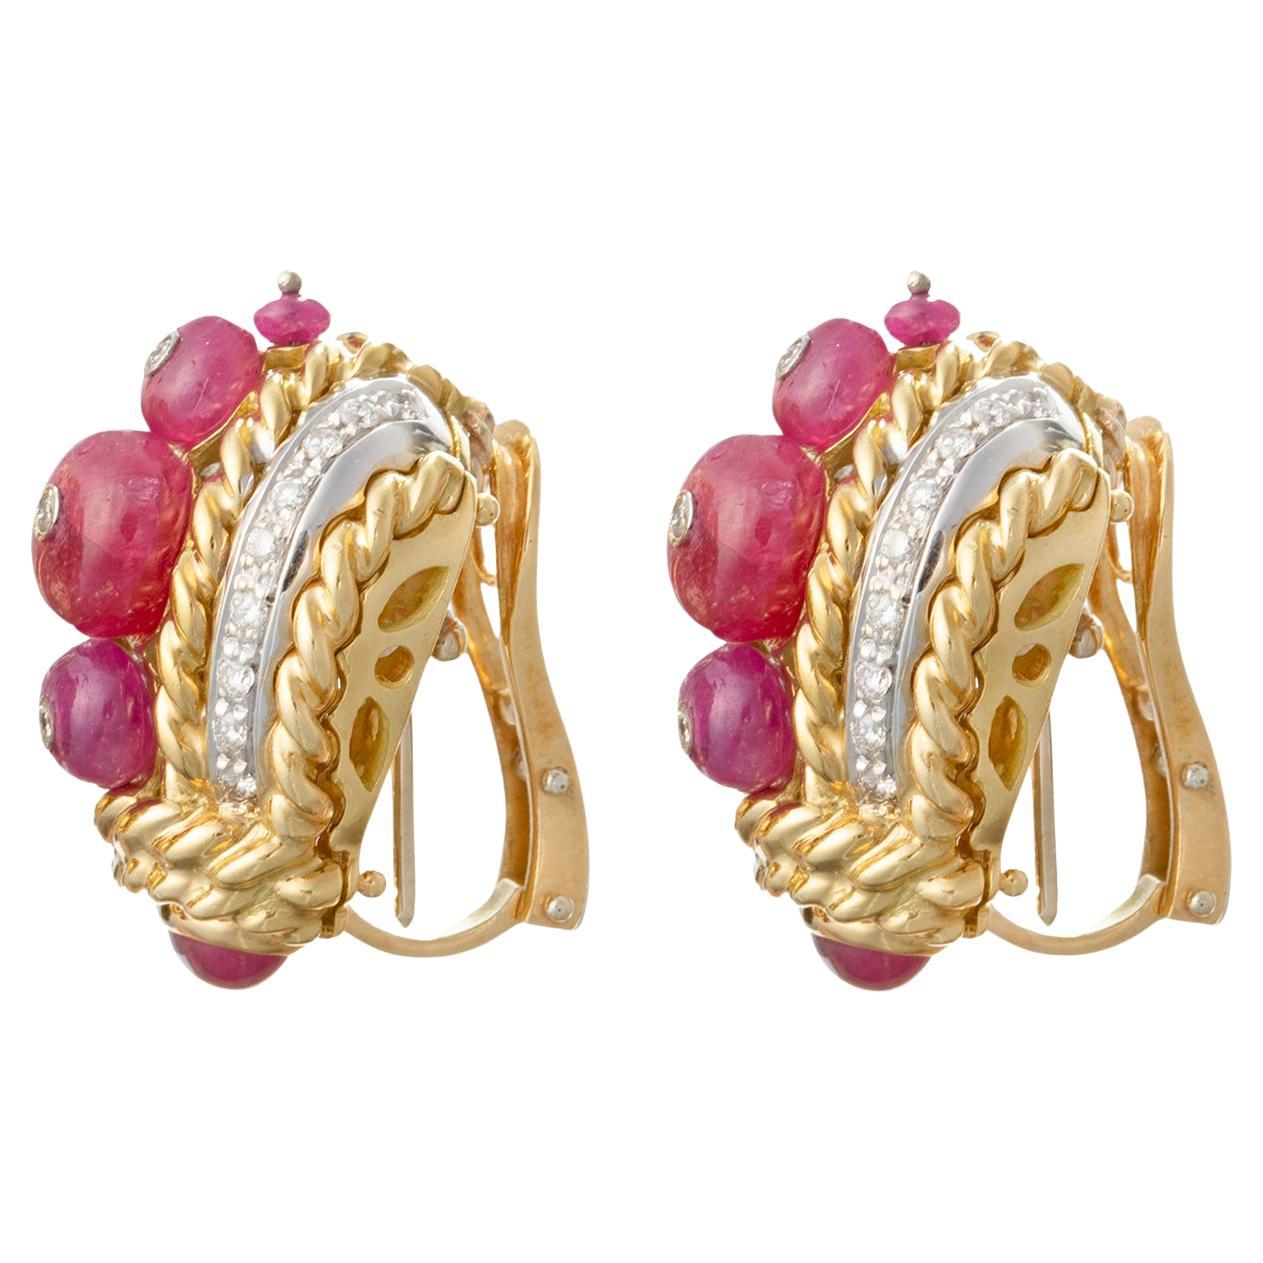 Clip earrings by Giovane Piranesi in a curved tapered design with rope-twist patterned accent in 18k yellow gold, each set with button-shaped rubies down the center and round brilliant-cut diamonds.  Forty-two diamonds weighing approximately 0.63